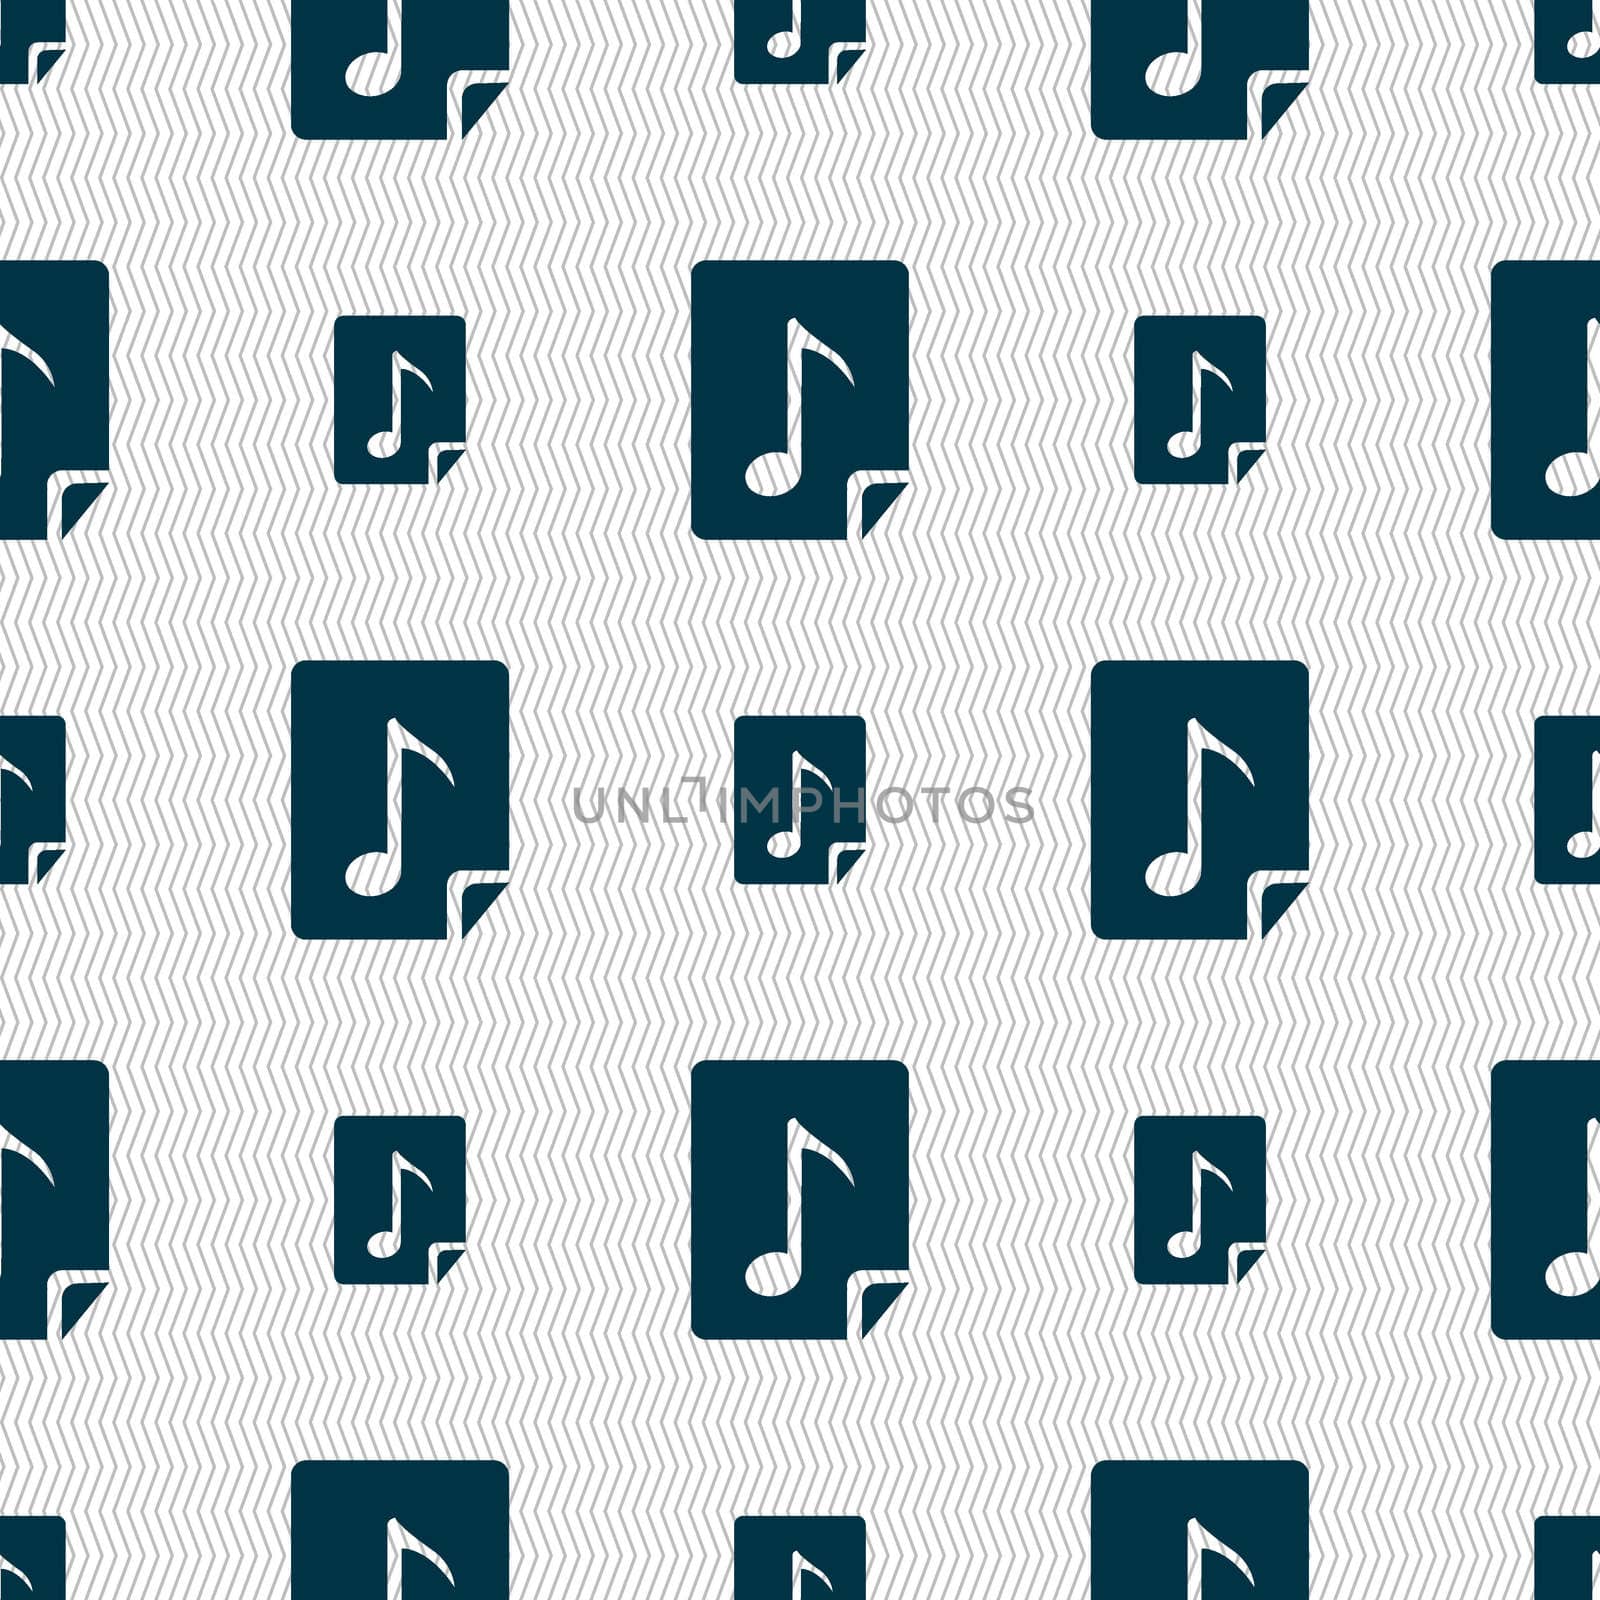 Audio, MP3 file icon sign. Seamless abstract background with geometric shapes. illustration